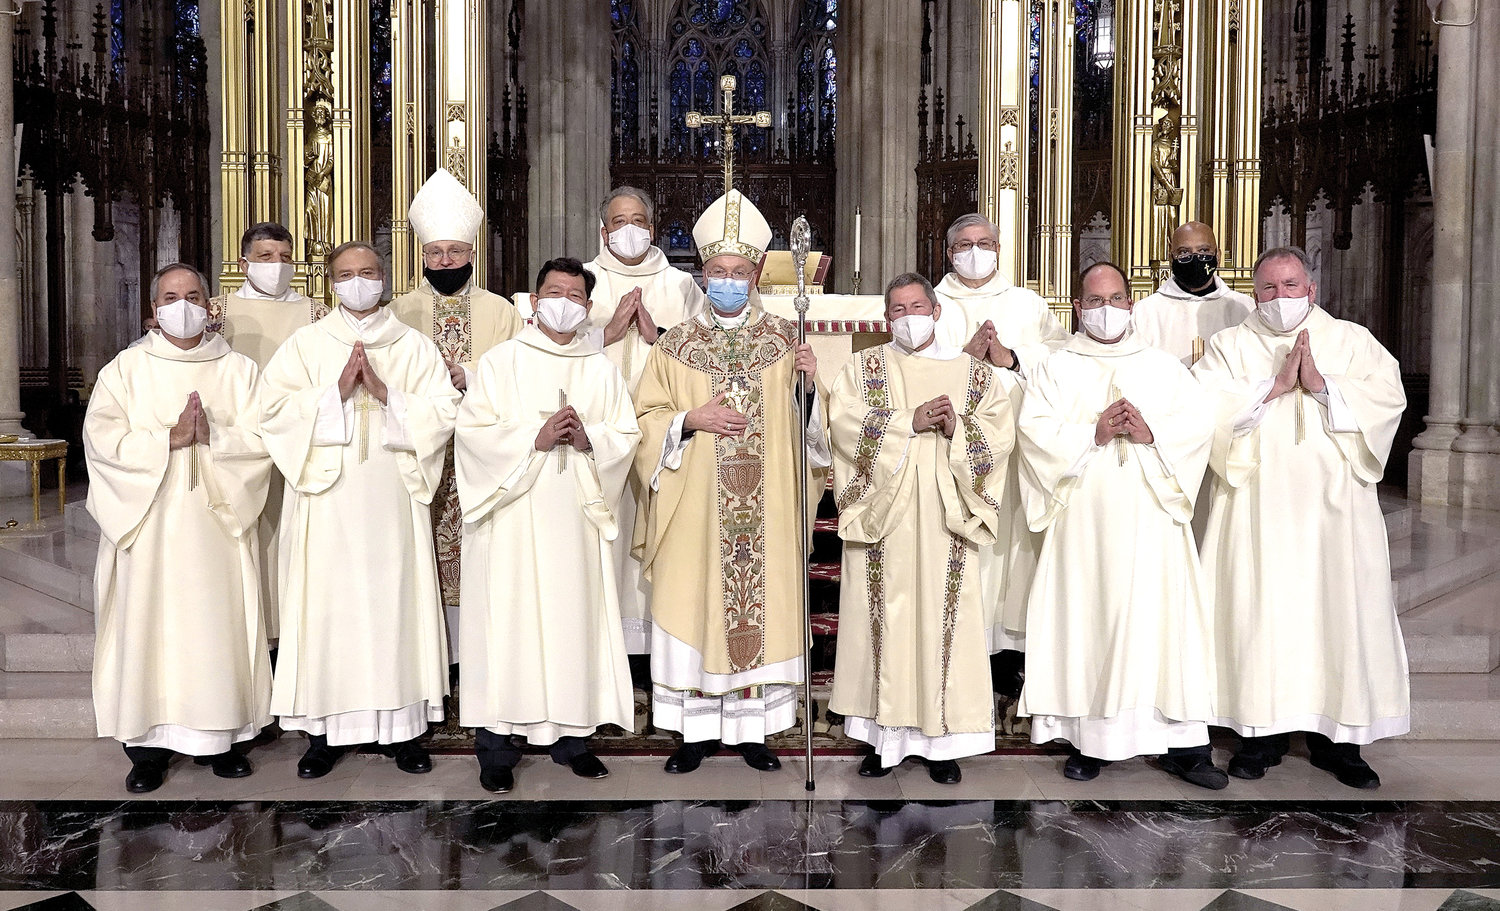 CLASS OF 2020—Auxiliary Bishop Edmund Whalen, center, ordained eight new permanent deacons to serve at parishes in the archdiocese Oct. 31 at St. Patrick’s Cathedral. Due to the coronavirus pandemic, safety protocols remain in place, including face masks. Front row, from left: Deacon Keith White, Deacon Mark Wisniewski, Deacon Jonathan Reyes, Auxiliary Bishop Edmund Whalen, Deacon Harold Hochstein, Deacon Paul Stolz and Deacon Dennis McCormack. Back row: Deacon Francis Orlando, director of diaconate formation in the archdiocesan Diaconate Office; Brooklyn Auxiliary Bishop James Massa, rector of St. Joseph Seminary, Dunwoodie; Deacon Stephen Broussard, Deacon Kevin McGuirk and Deacon James Bello, director of diaconate ministry and life in the Diaconate Office.